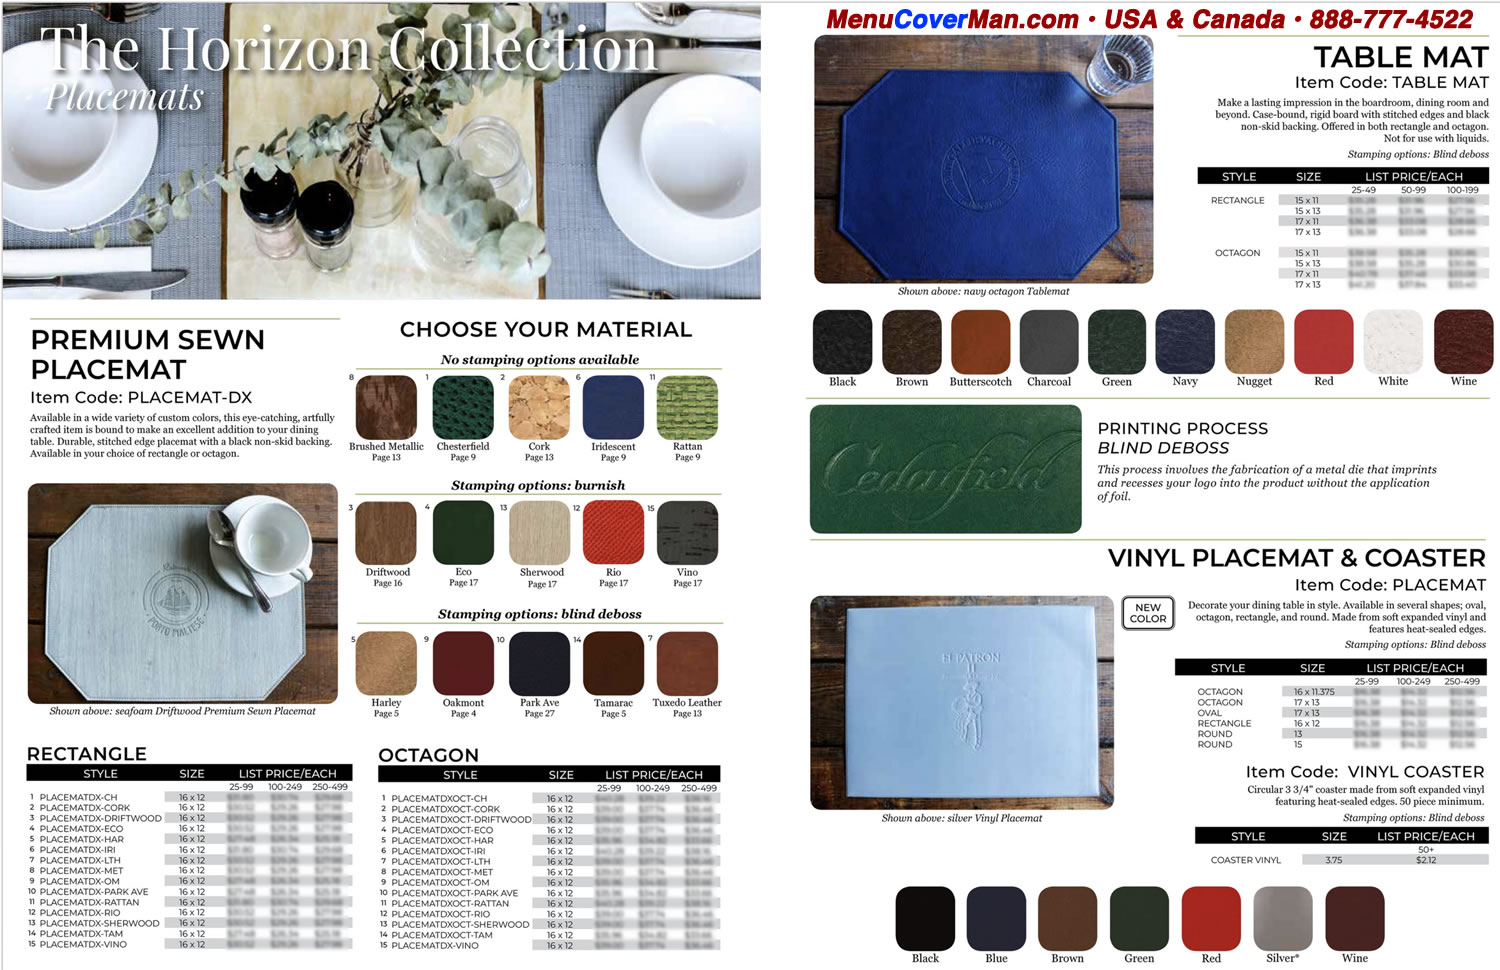 The Horizon Collection of Placemats from MenuCoverMan